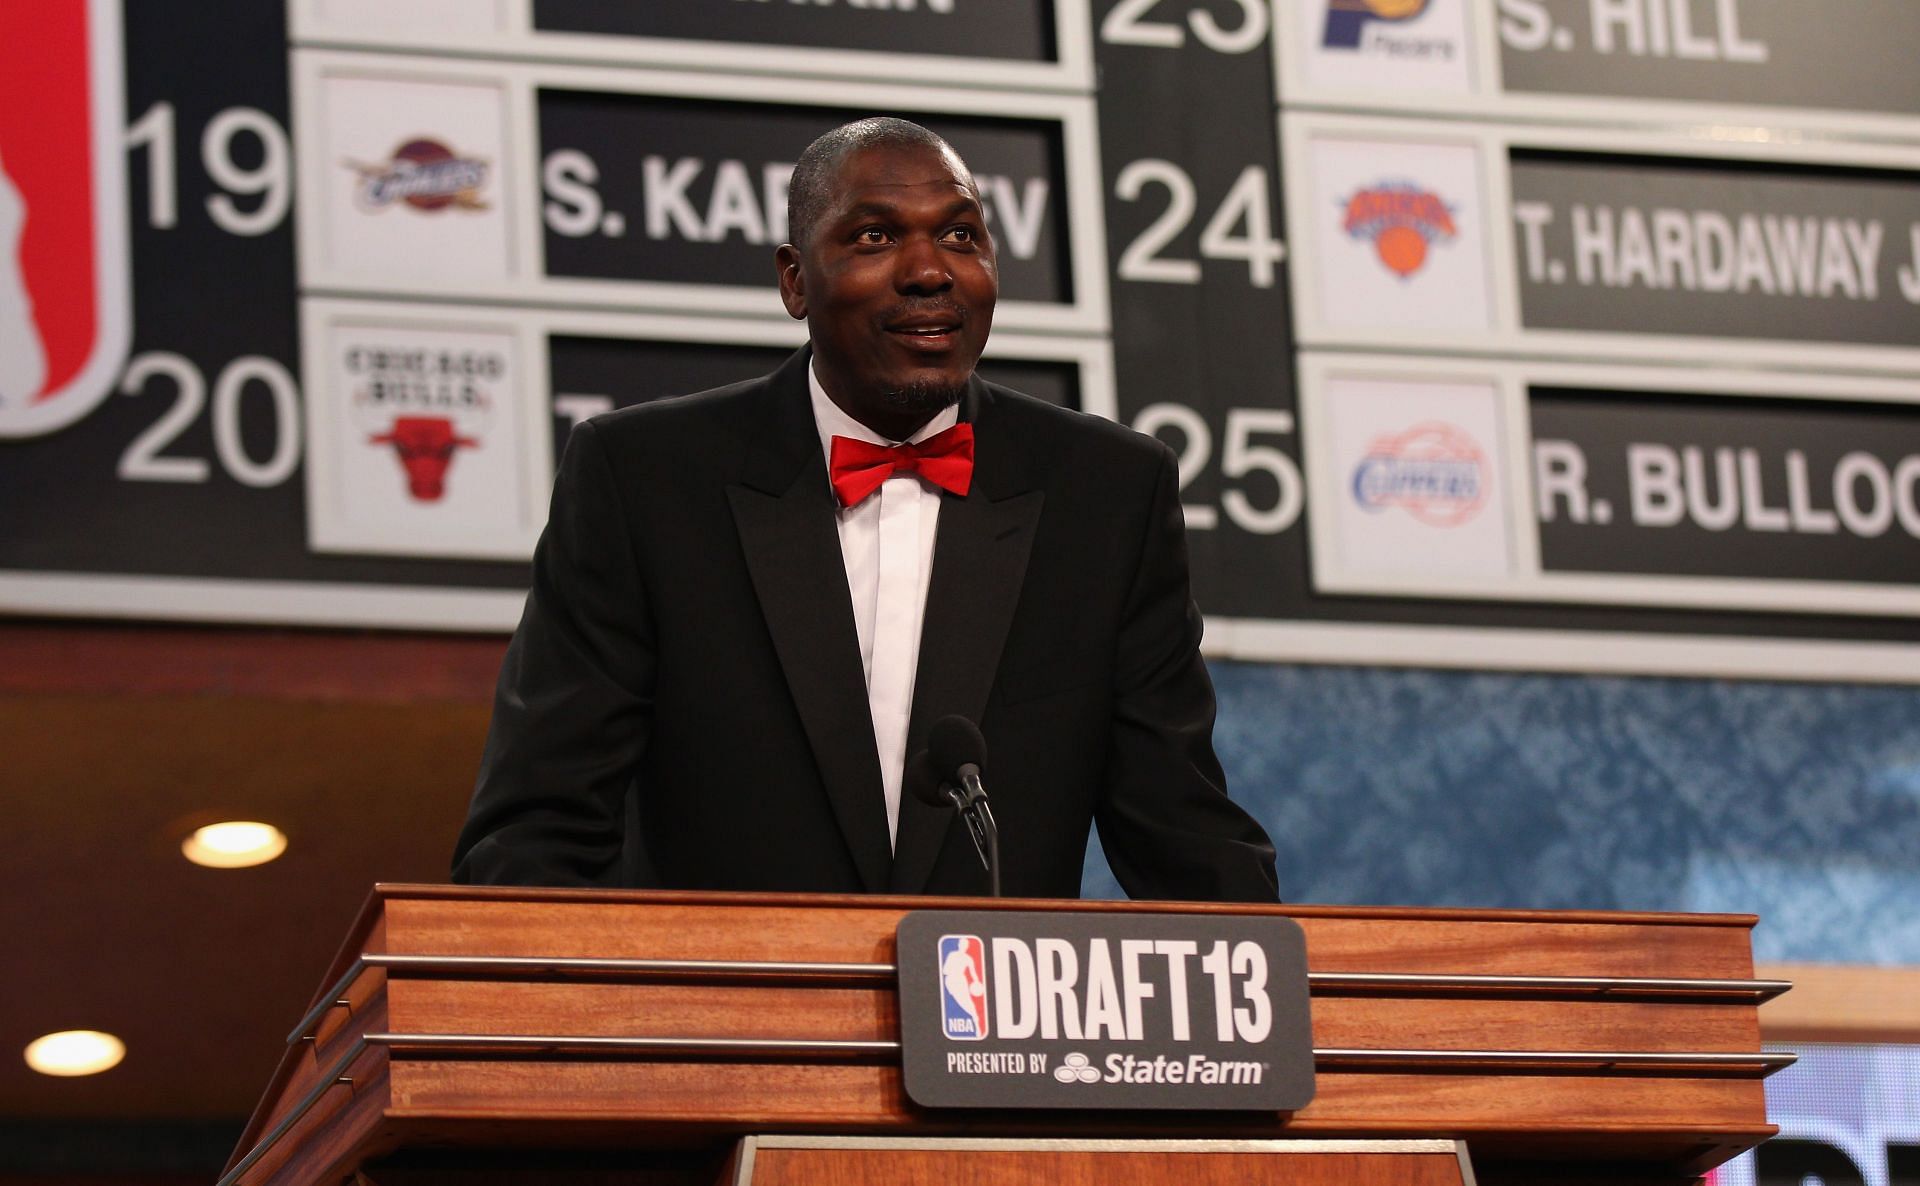 Hakeem Olajuwon speaks during the 2013 NBA draft at Barclays Center on June 27, 2013, in New York City.